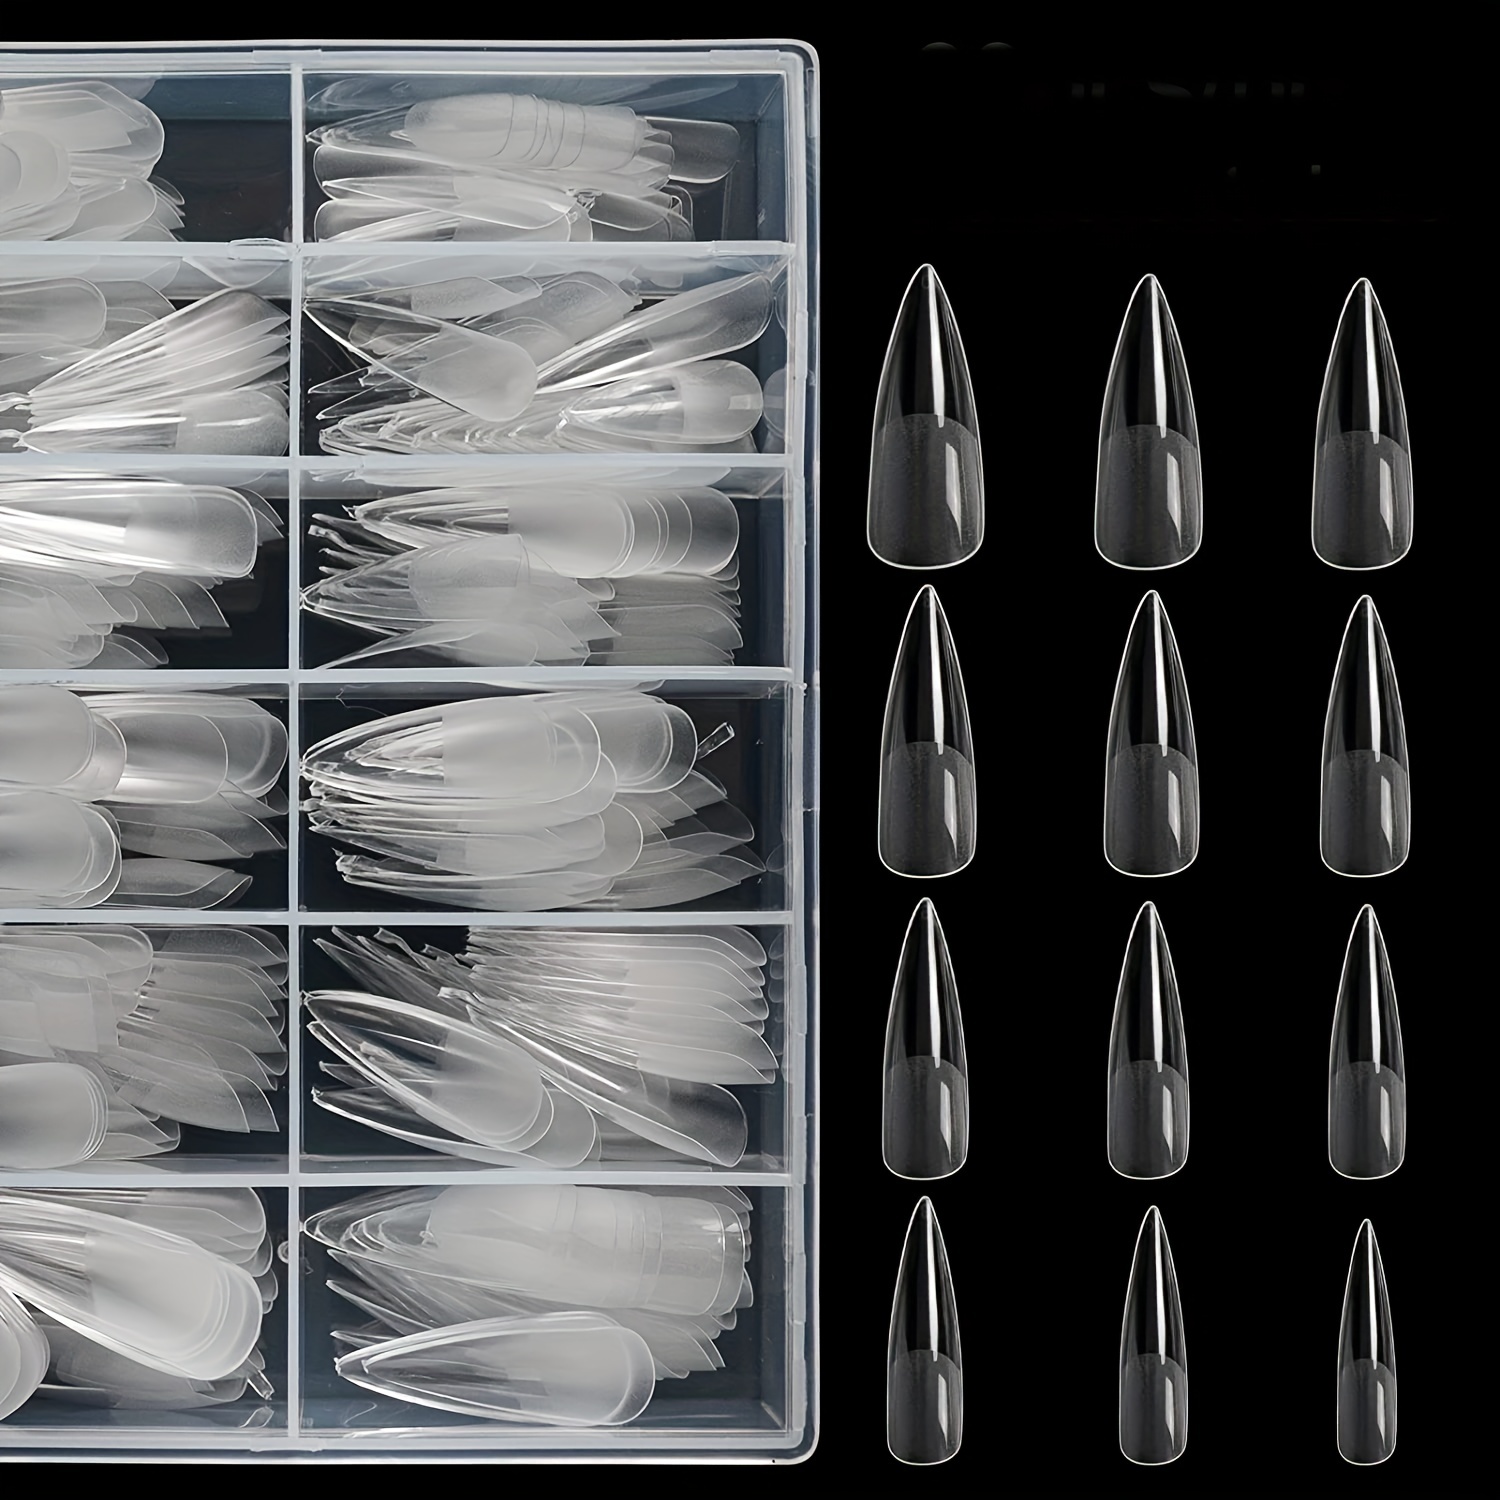 

360 Pcs, Long Stiletto Nail Tips - Full Cover Fake Nail Tips With Box - Clear False Nail Tips For Nail Salons And Diy - 12 Sizes Available